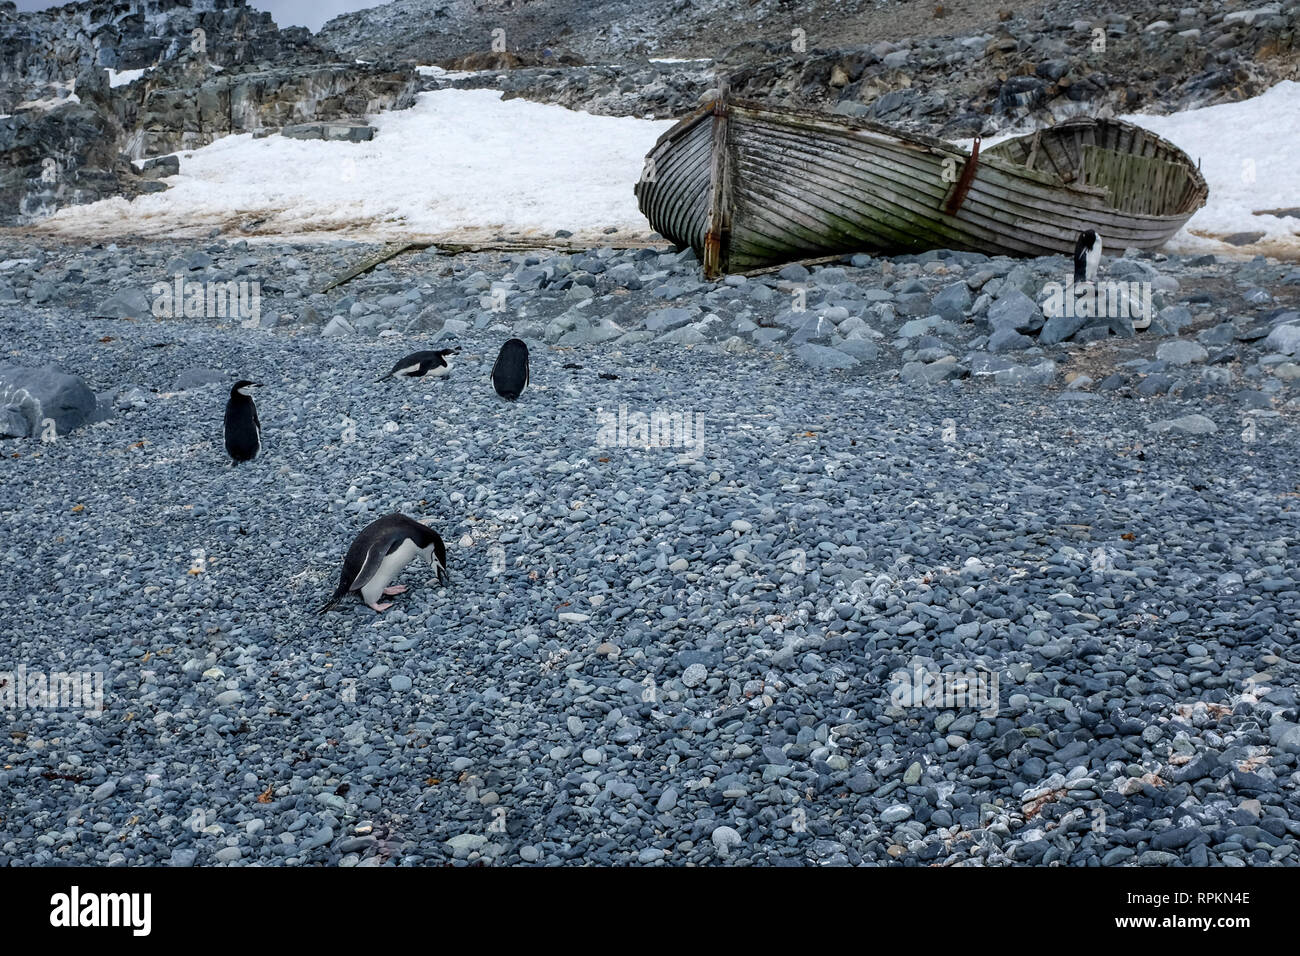 Scene of icebergs, penguins, seals, snow and ice in Antarctica, world's southernmost continent Stock Photo